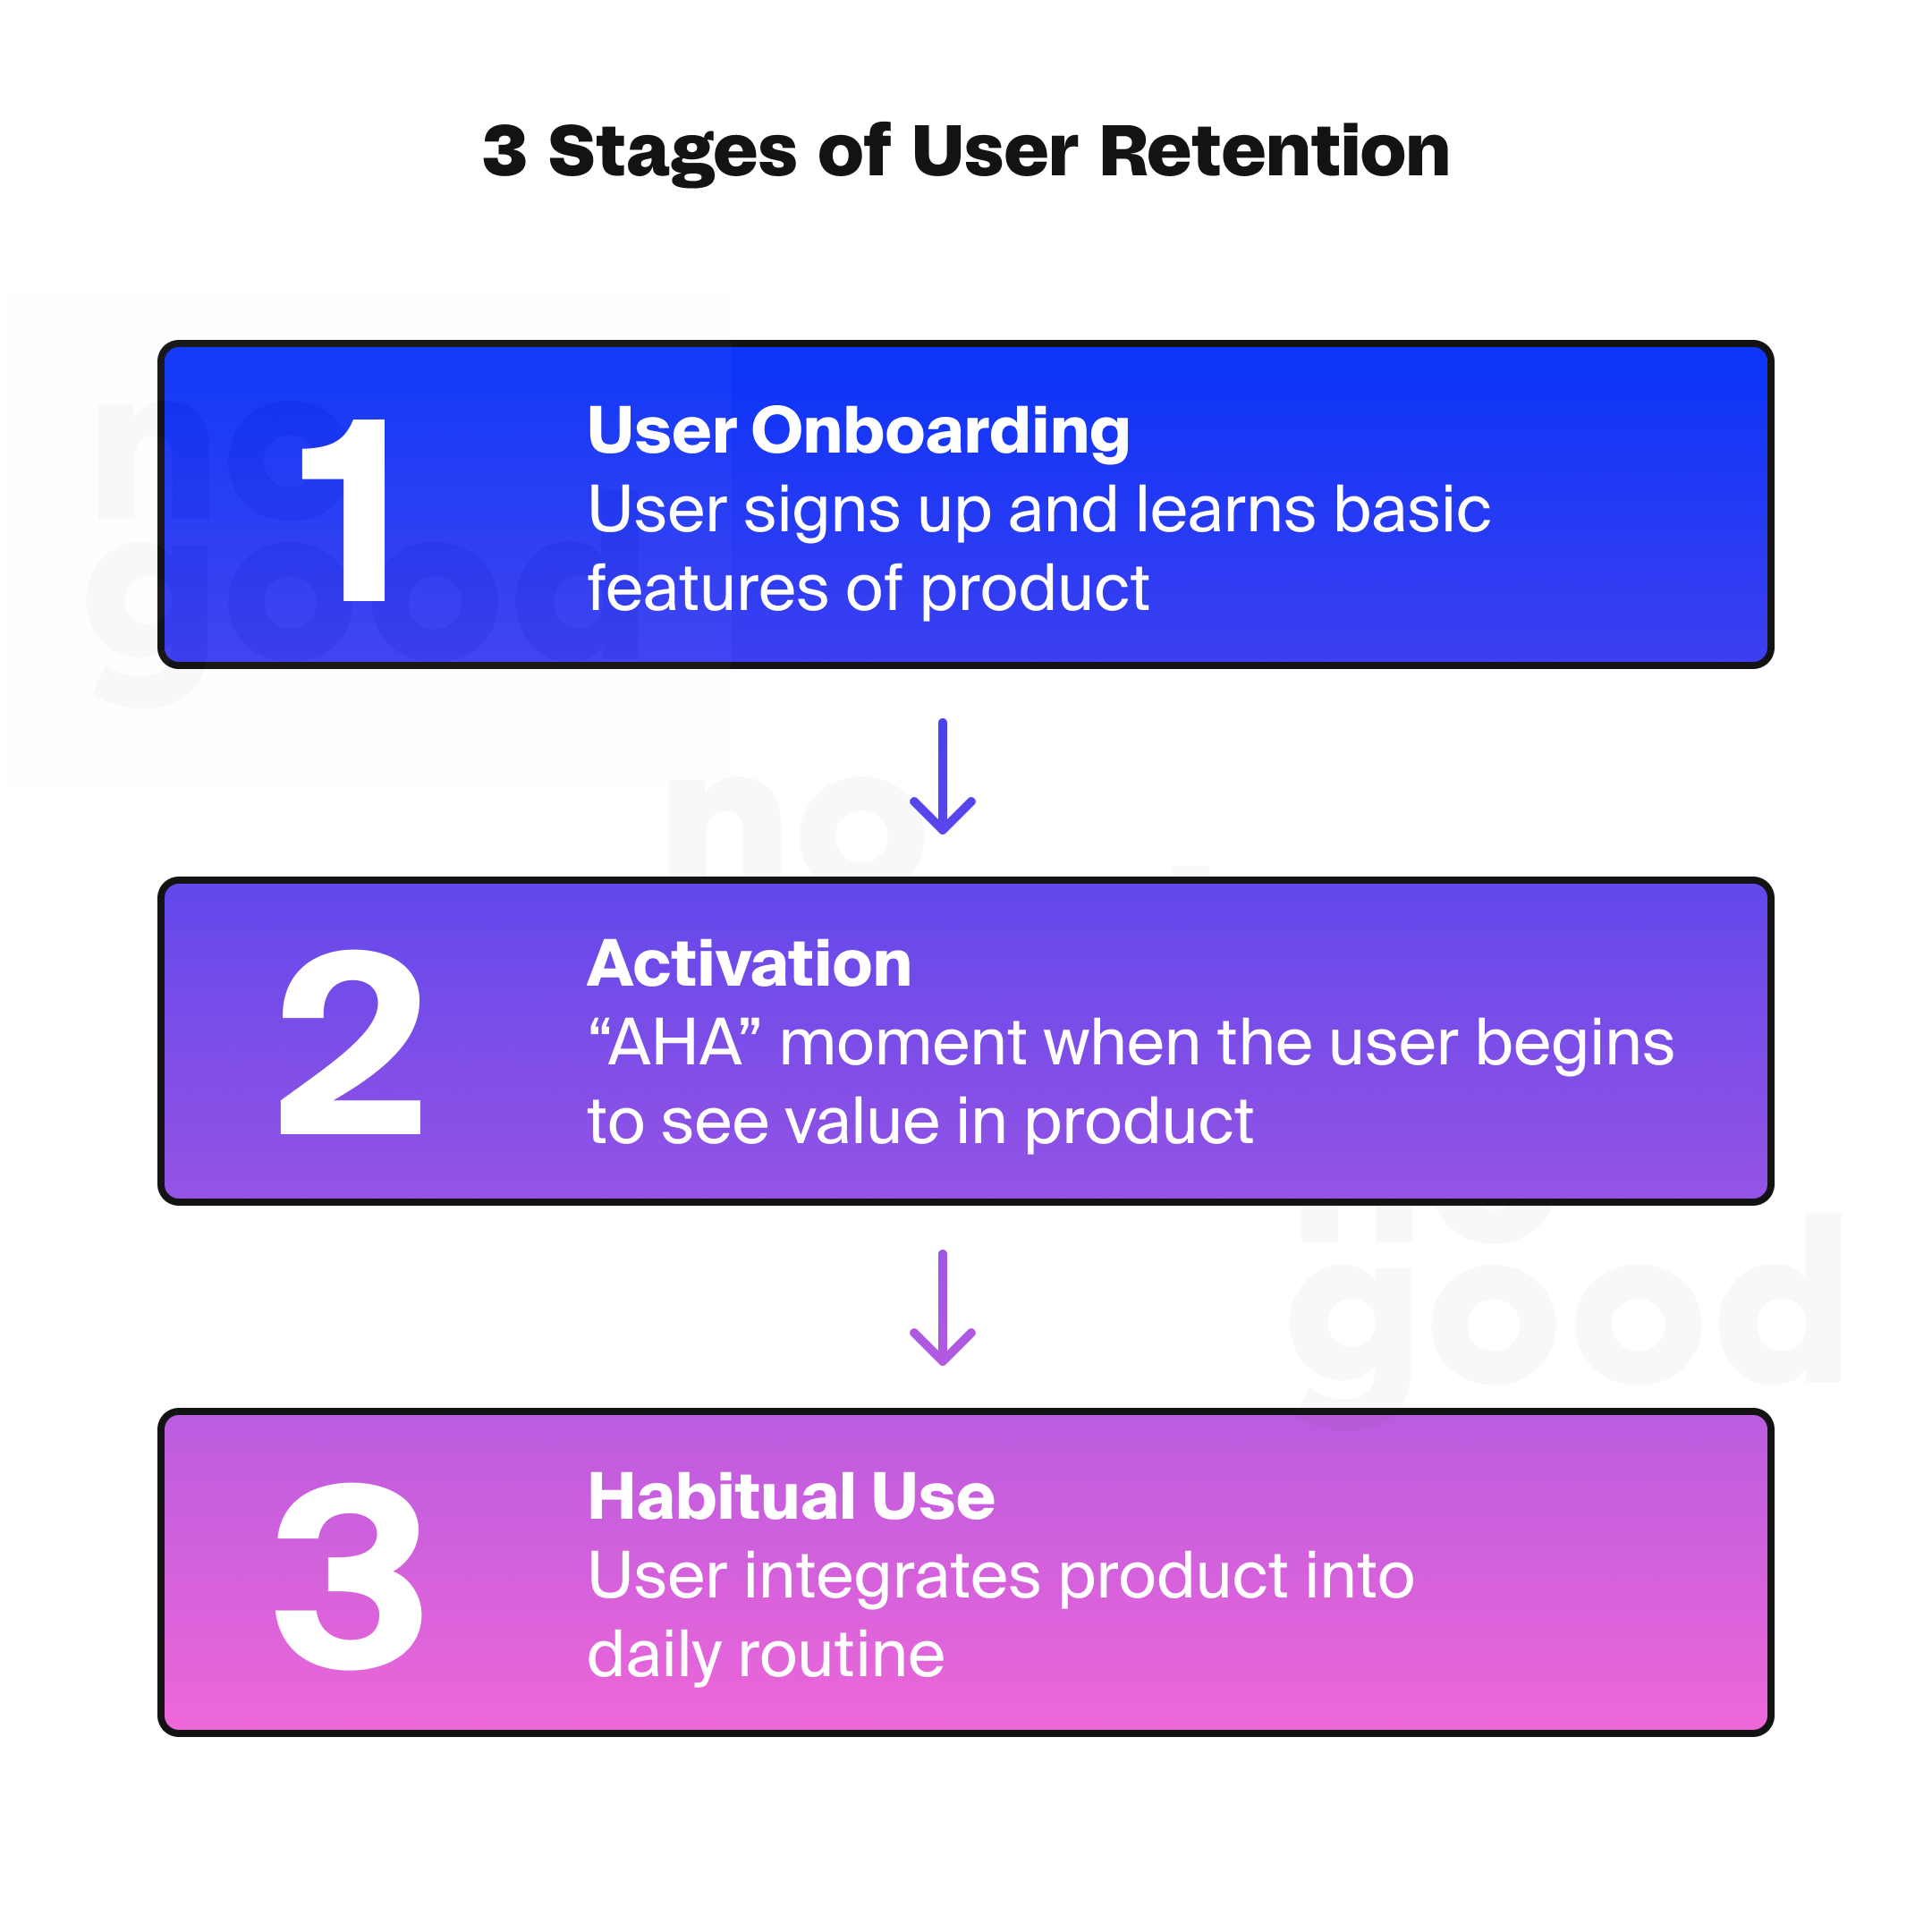 3 stages of user retention